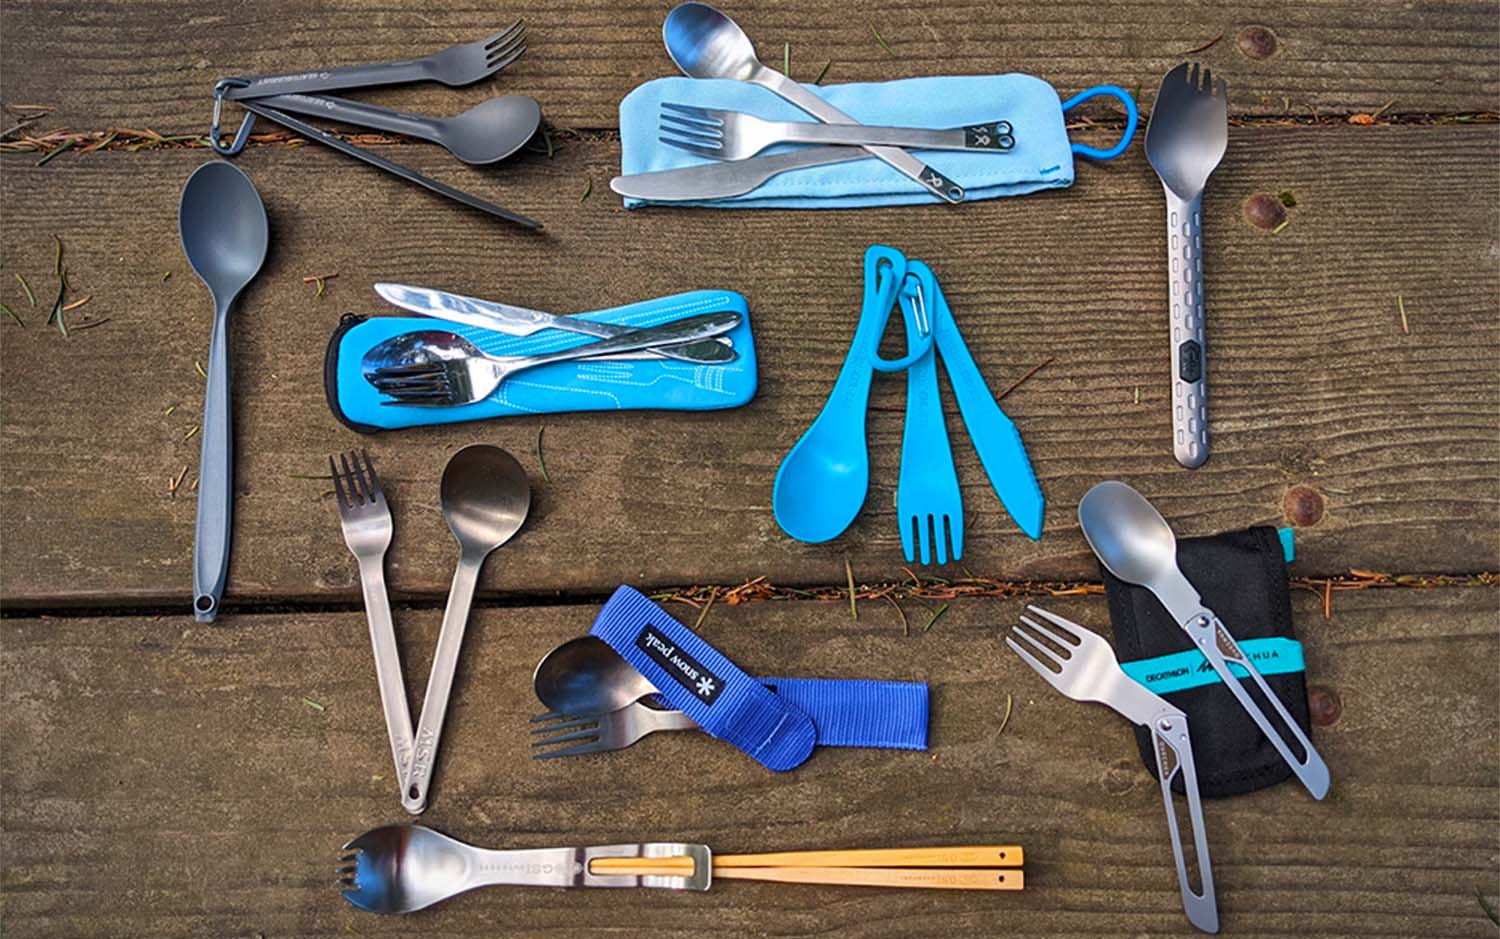 Portable Utensils, Travel Camping Cutlery Set, 10-Piece Including